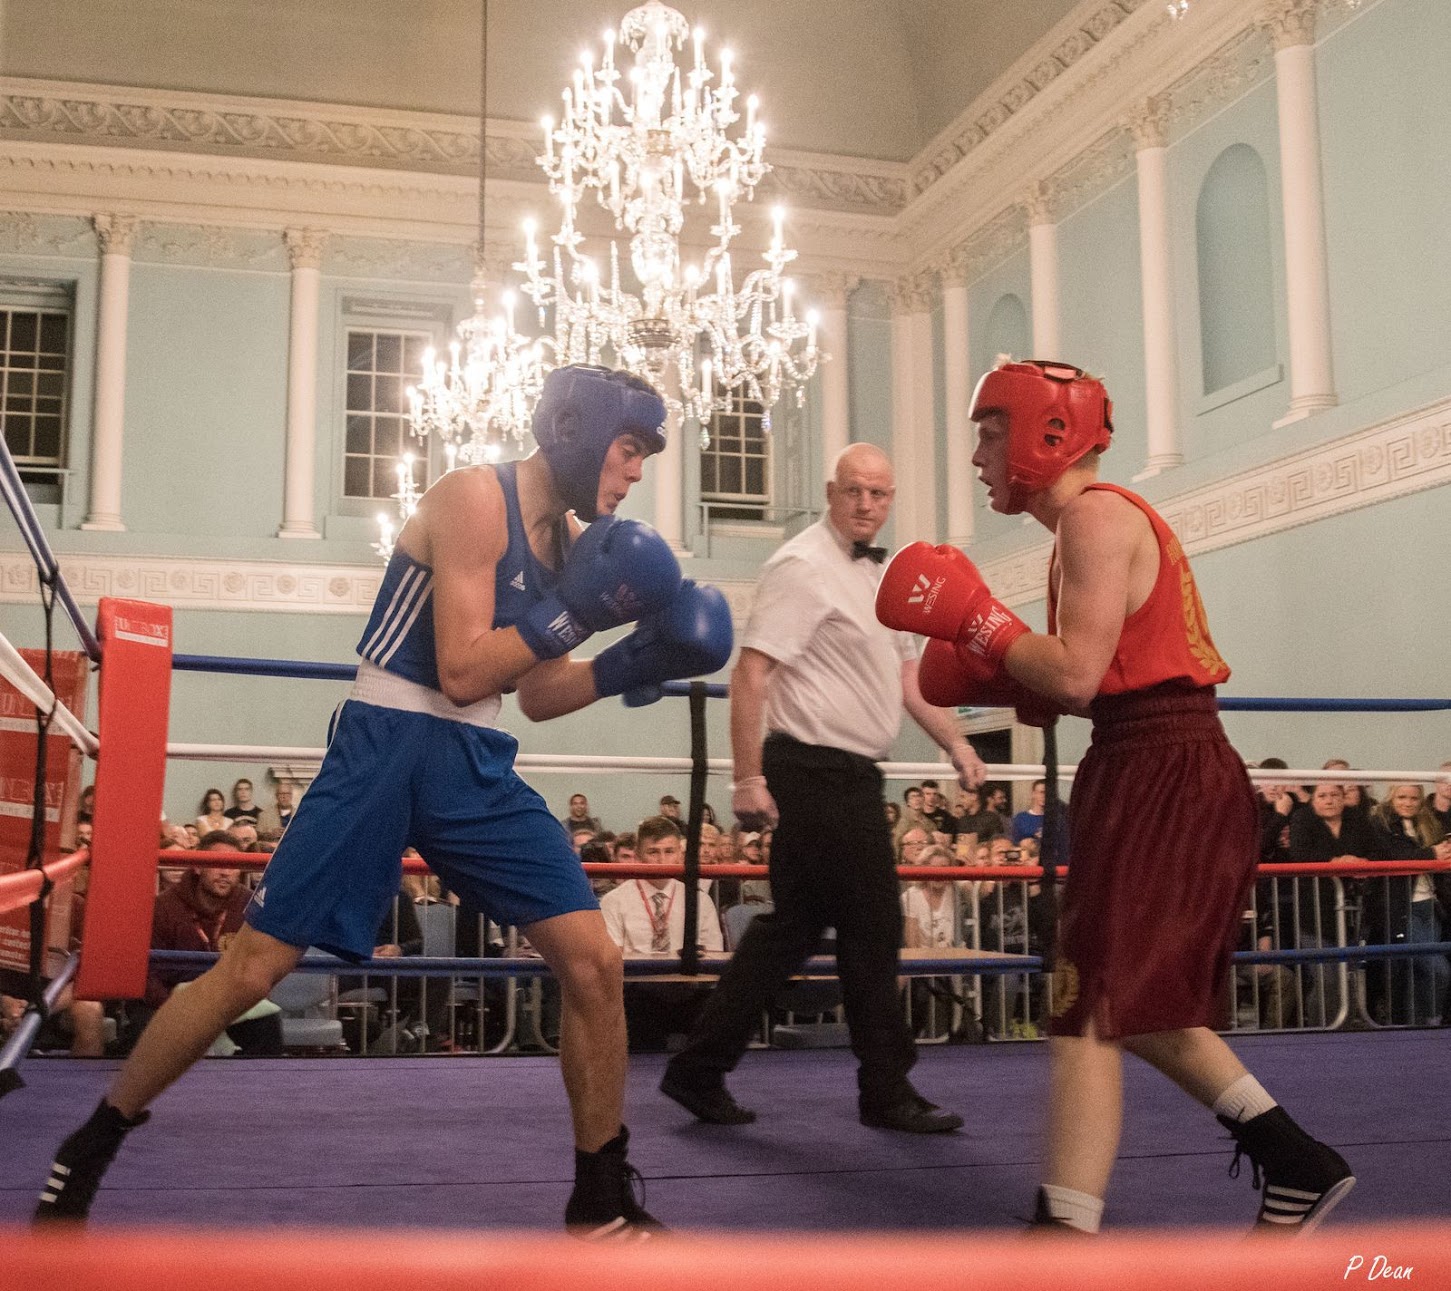 Read more about the article “Incredible” Boxing Shows at the Assembly Rooms